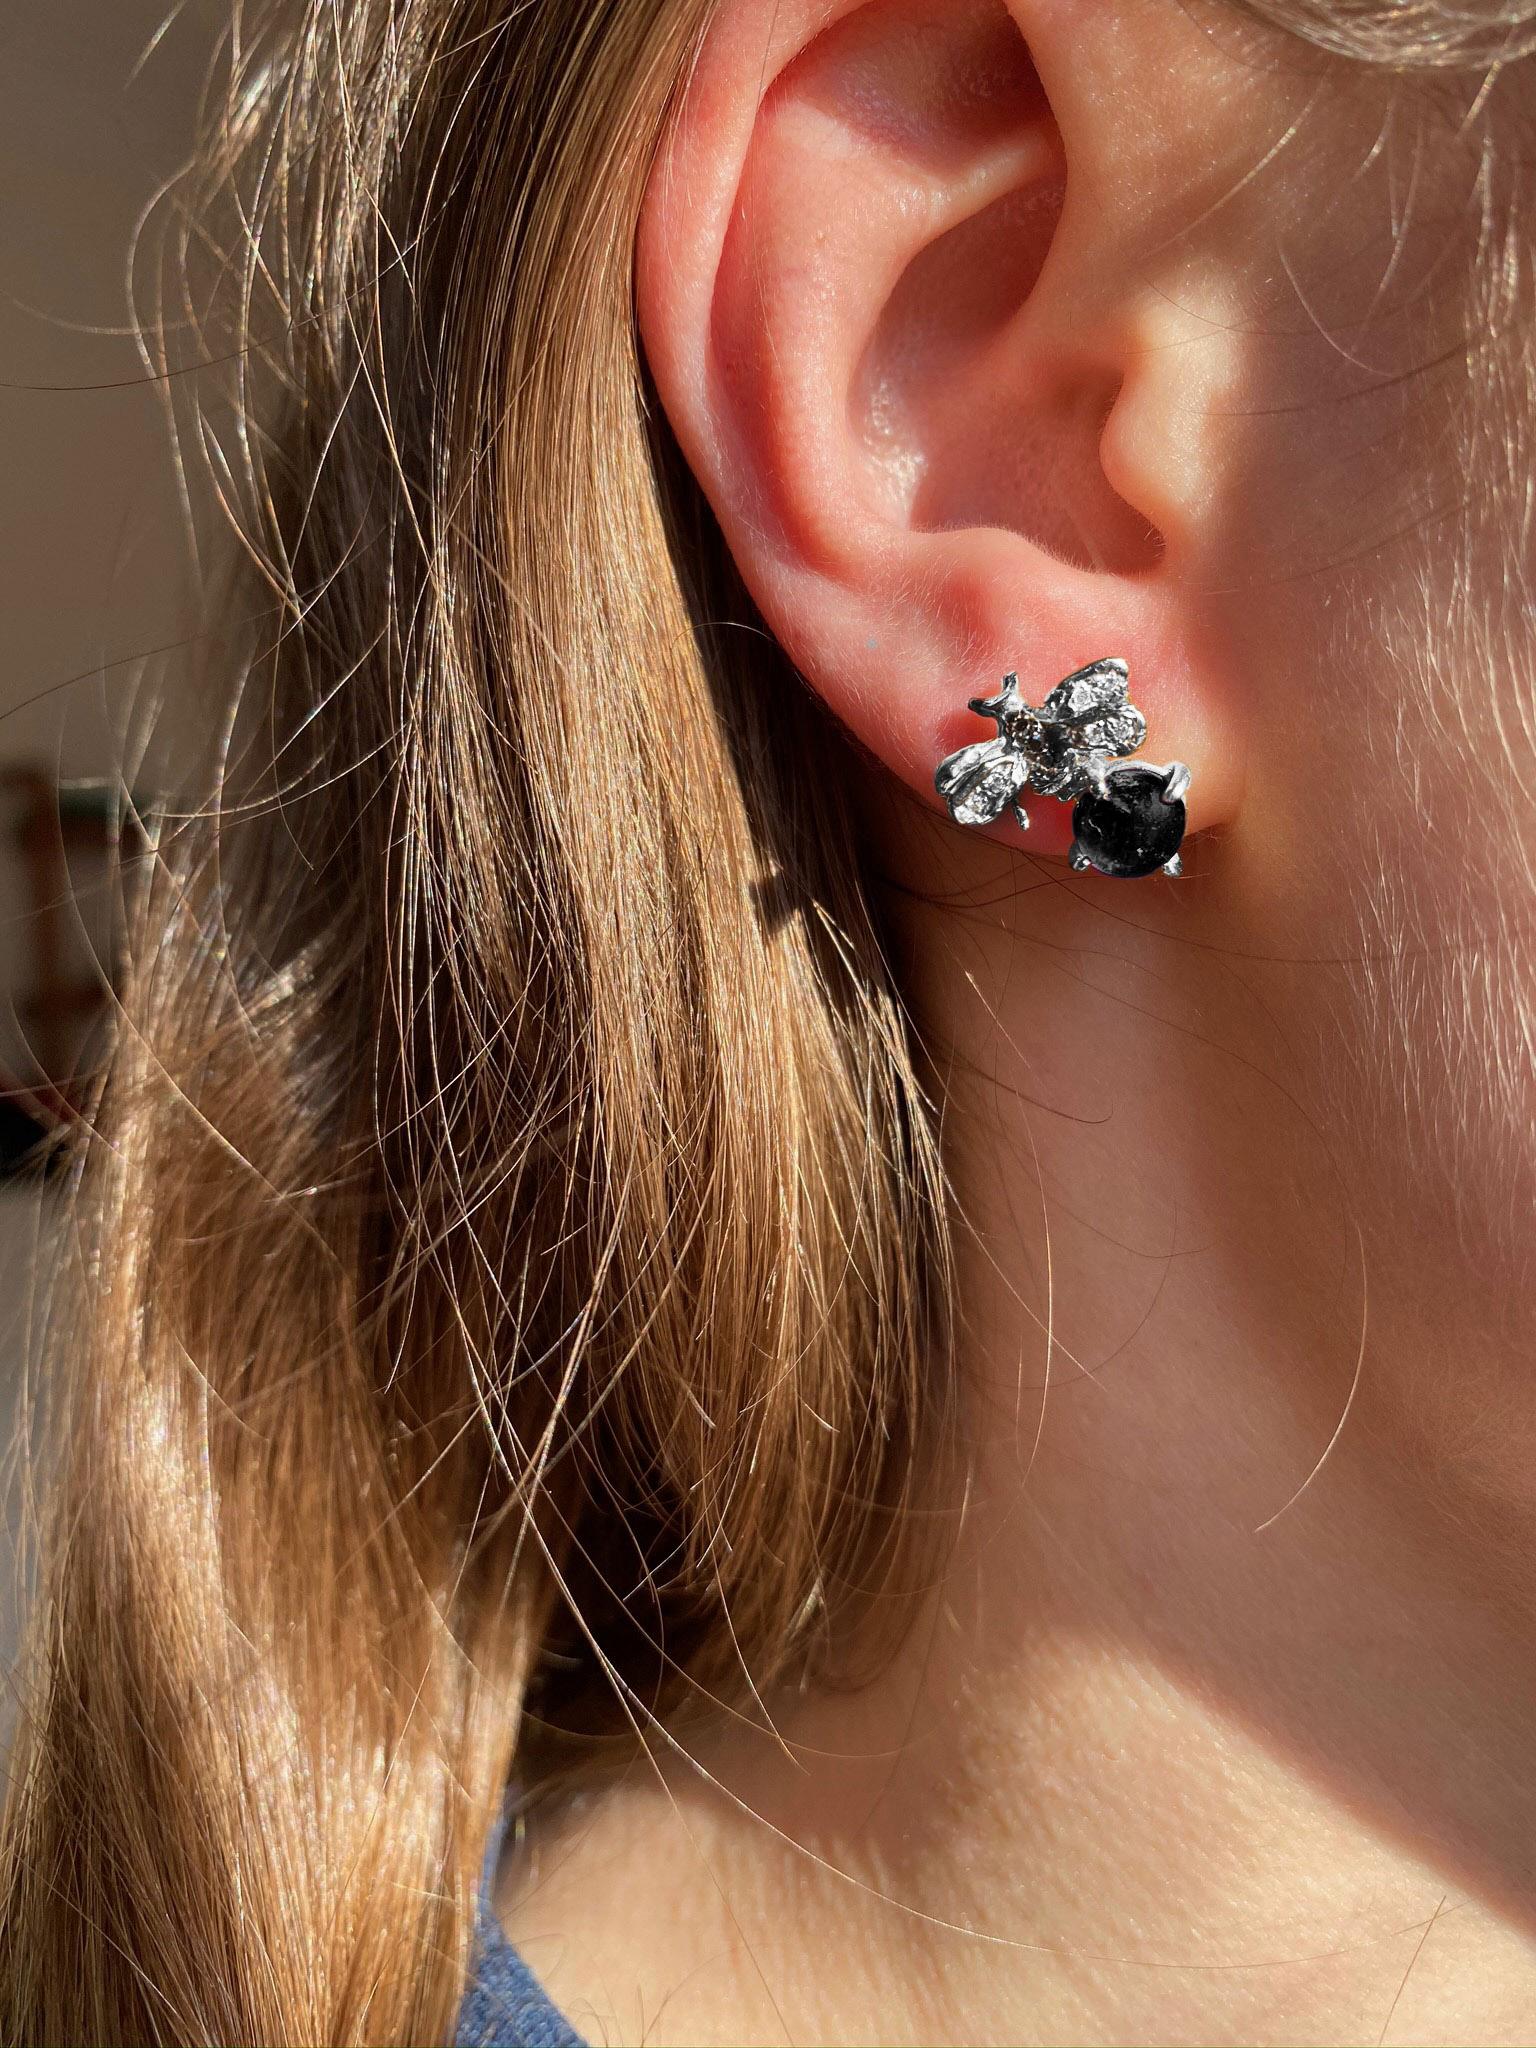 Rossella Ugolini Unisex 18Karat White Gold Round Cut Onyx 0.10 Karat White Diamonds 0.06 Karat Black Diamonds Small Bee Stud Earrings.
The bee has always inspired the designer from different points of view: from her ability to actively participate